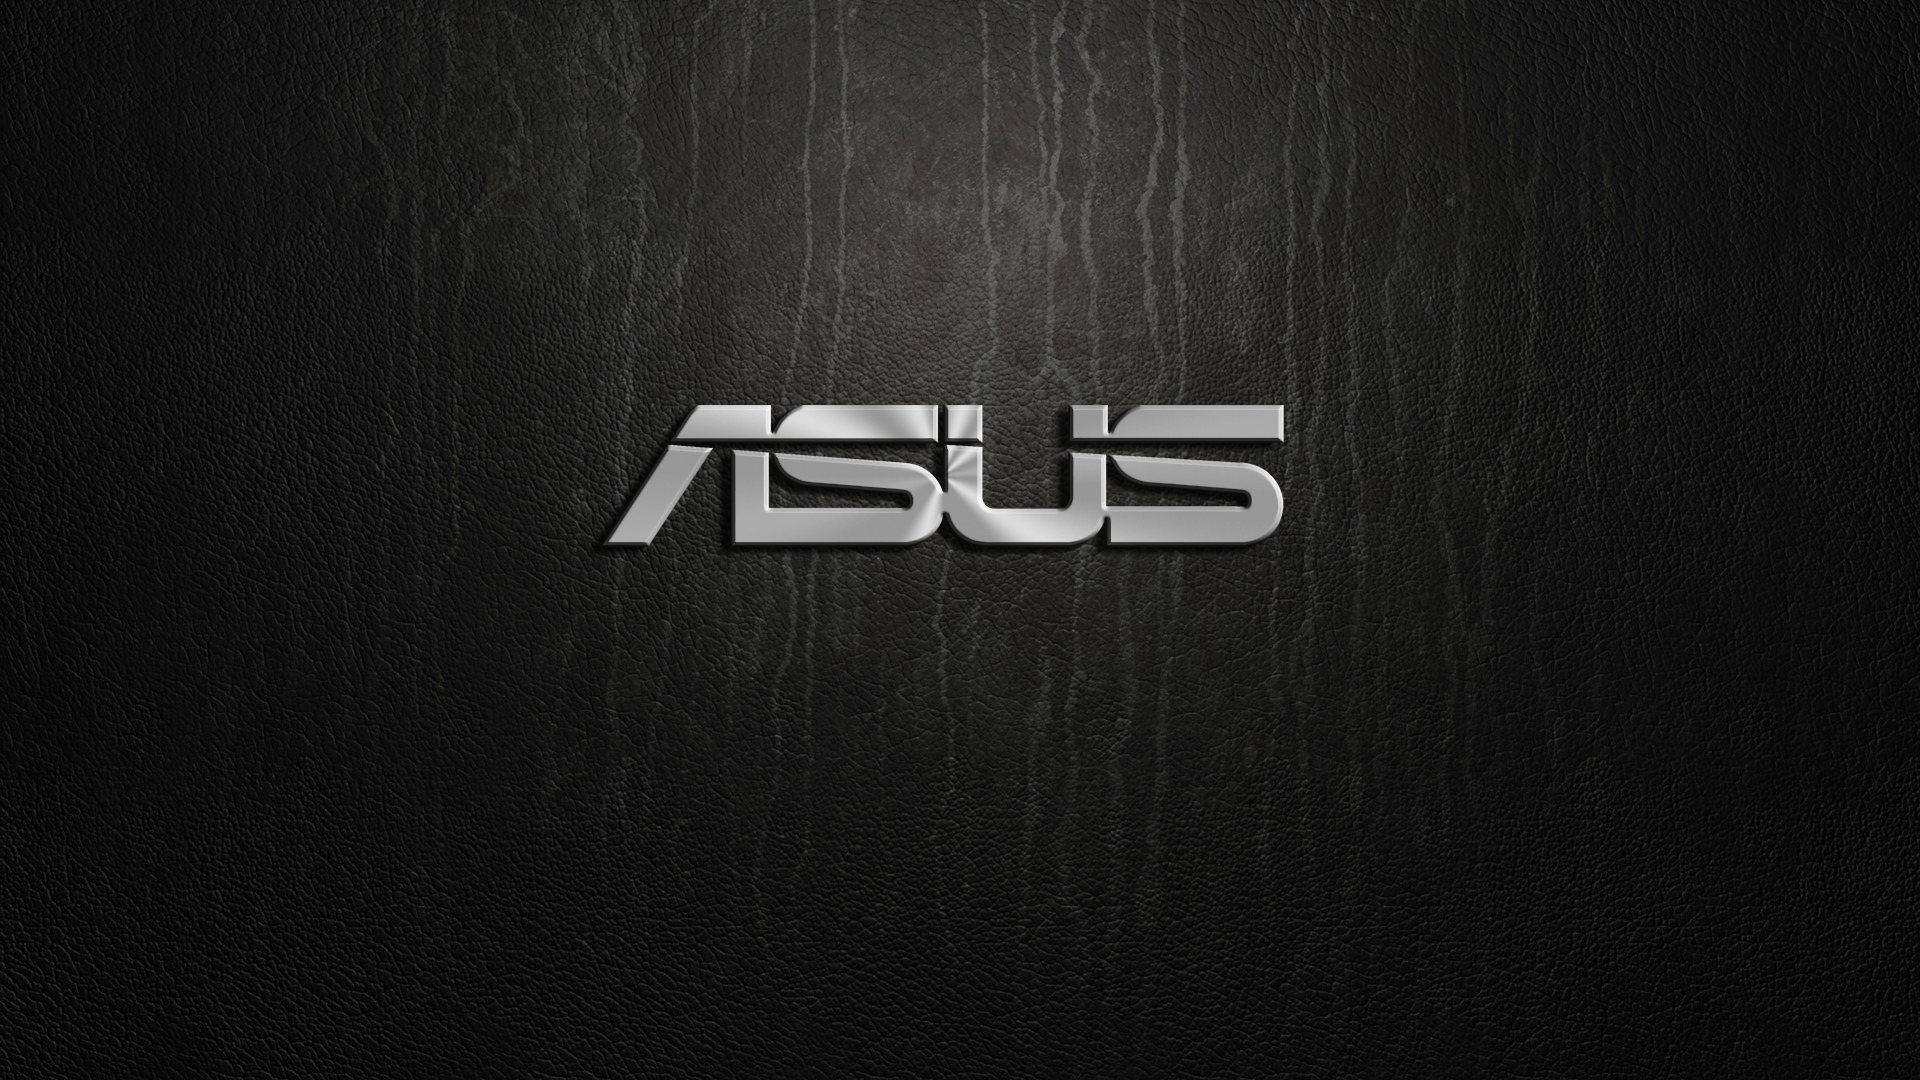 Asus Company Logo - ASUS Ranked As One of World's Most Admired Companies by Fortune ...